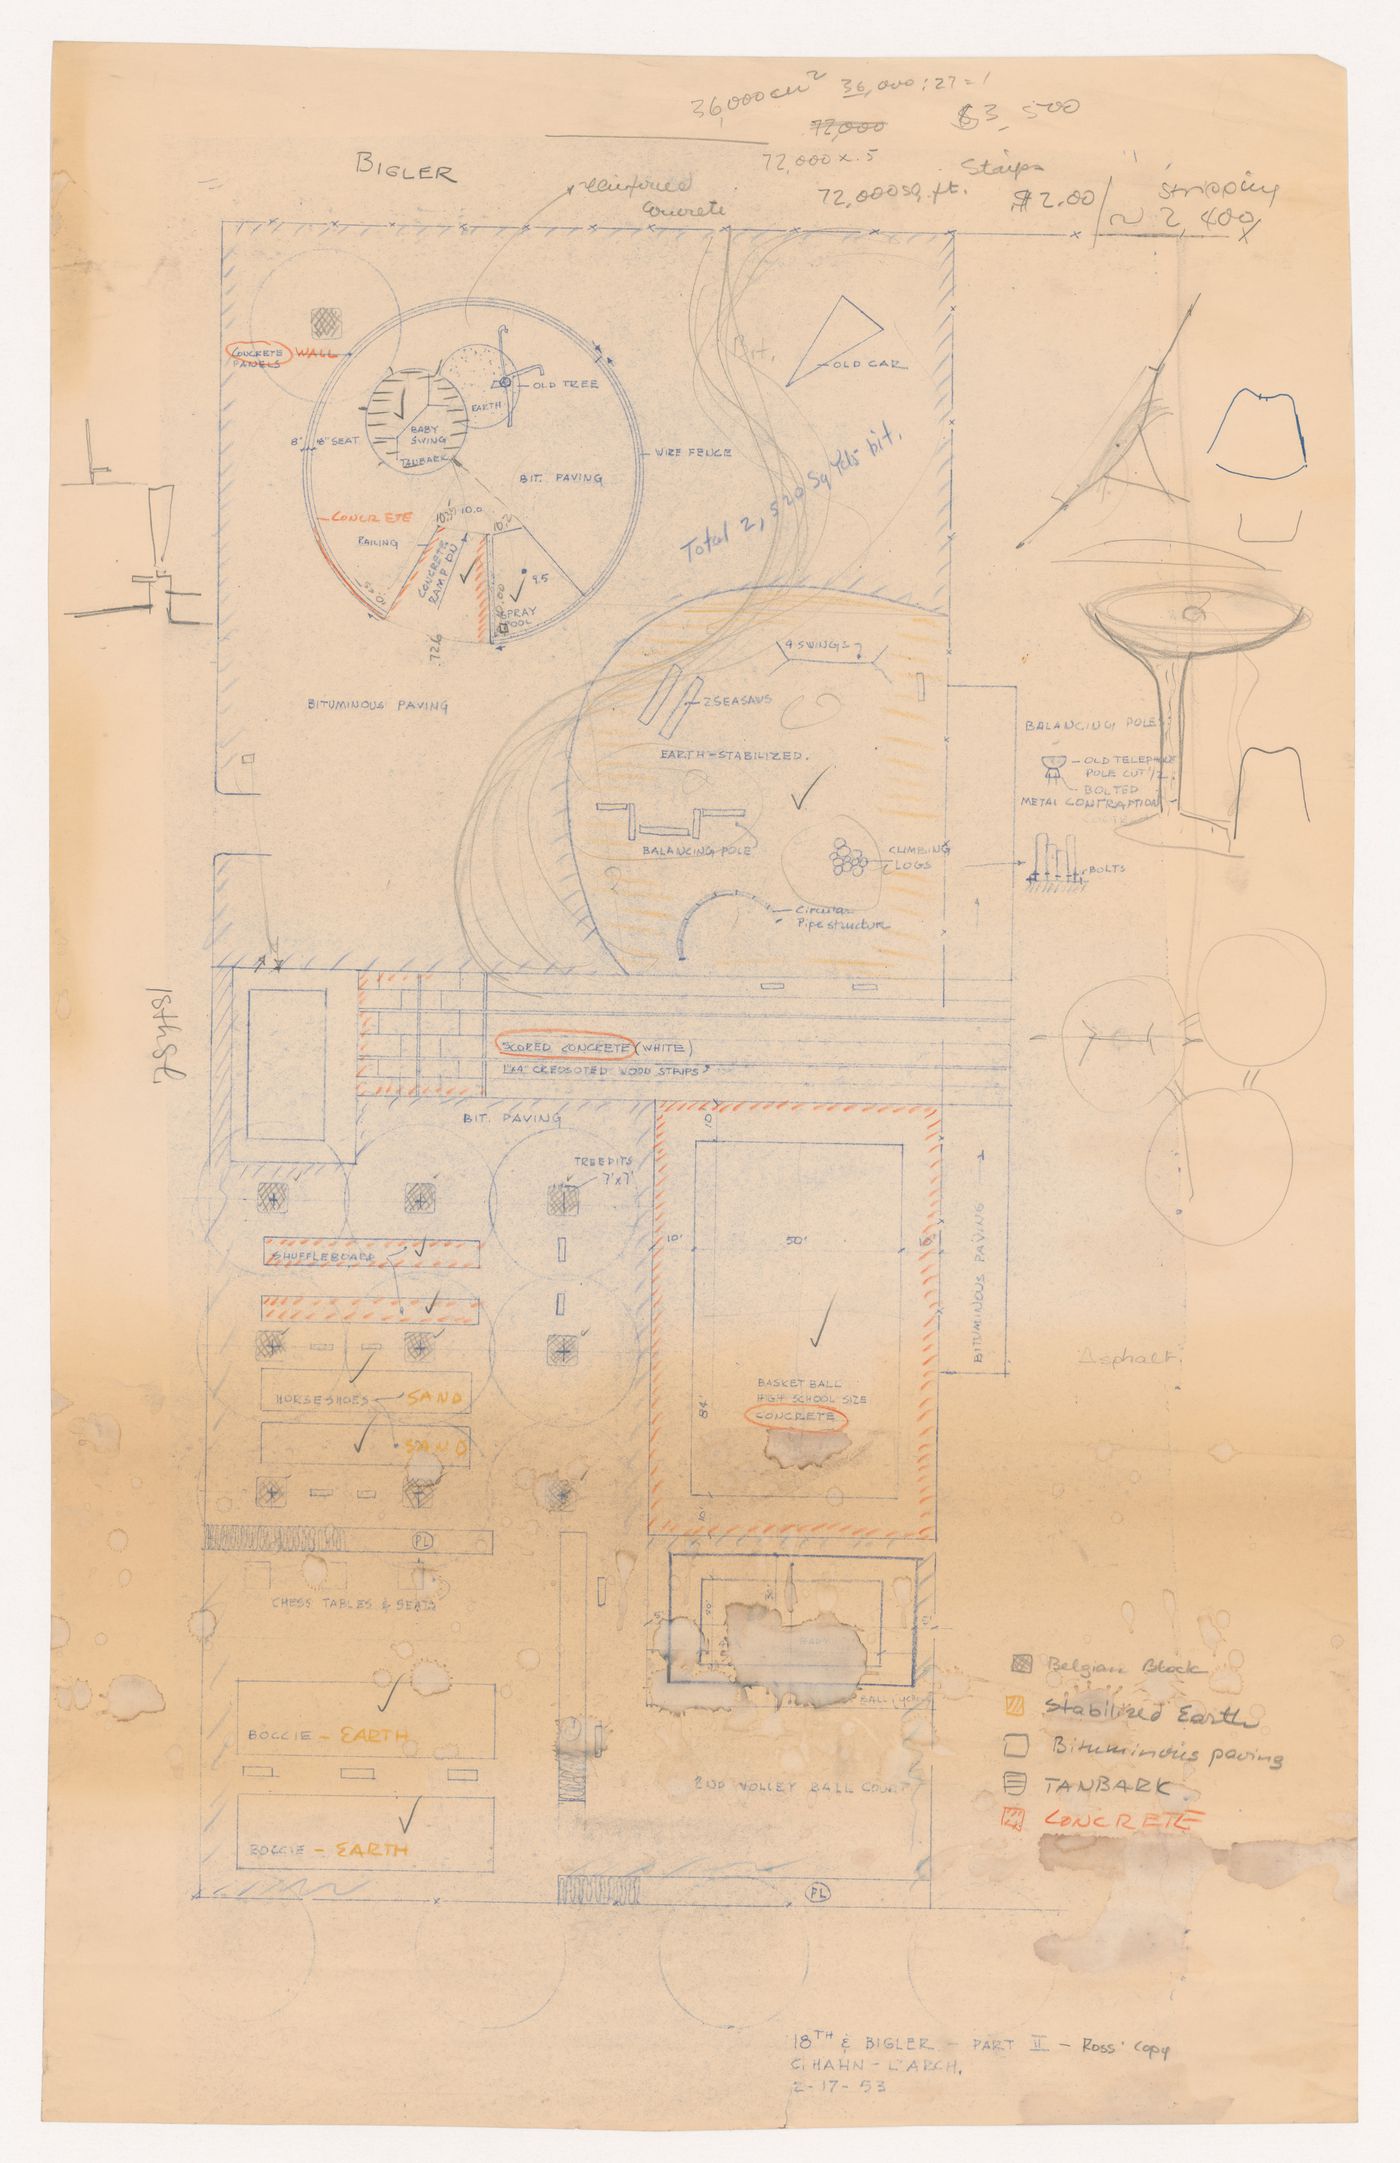 Plan with sketches and notes for recreational area at 18th and Bigler Streets, Philadelphia, Pennsylvania